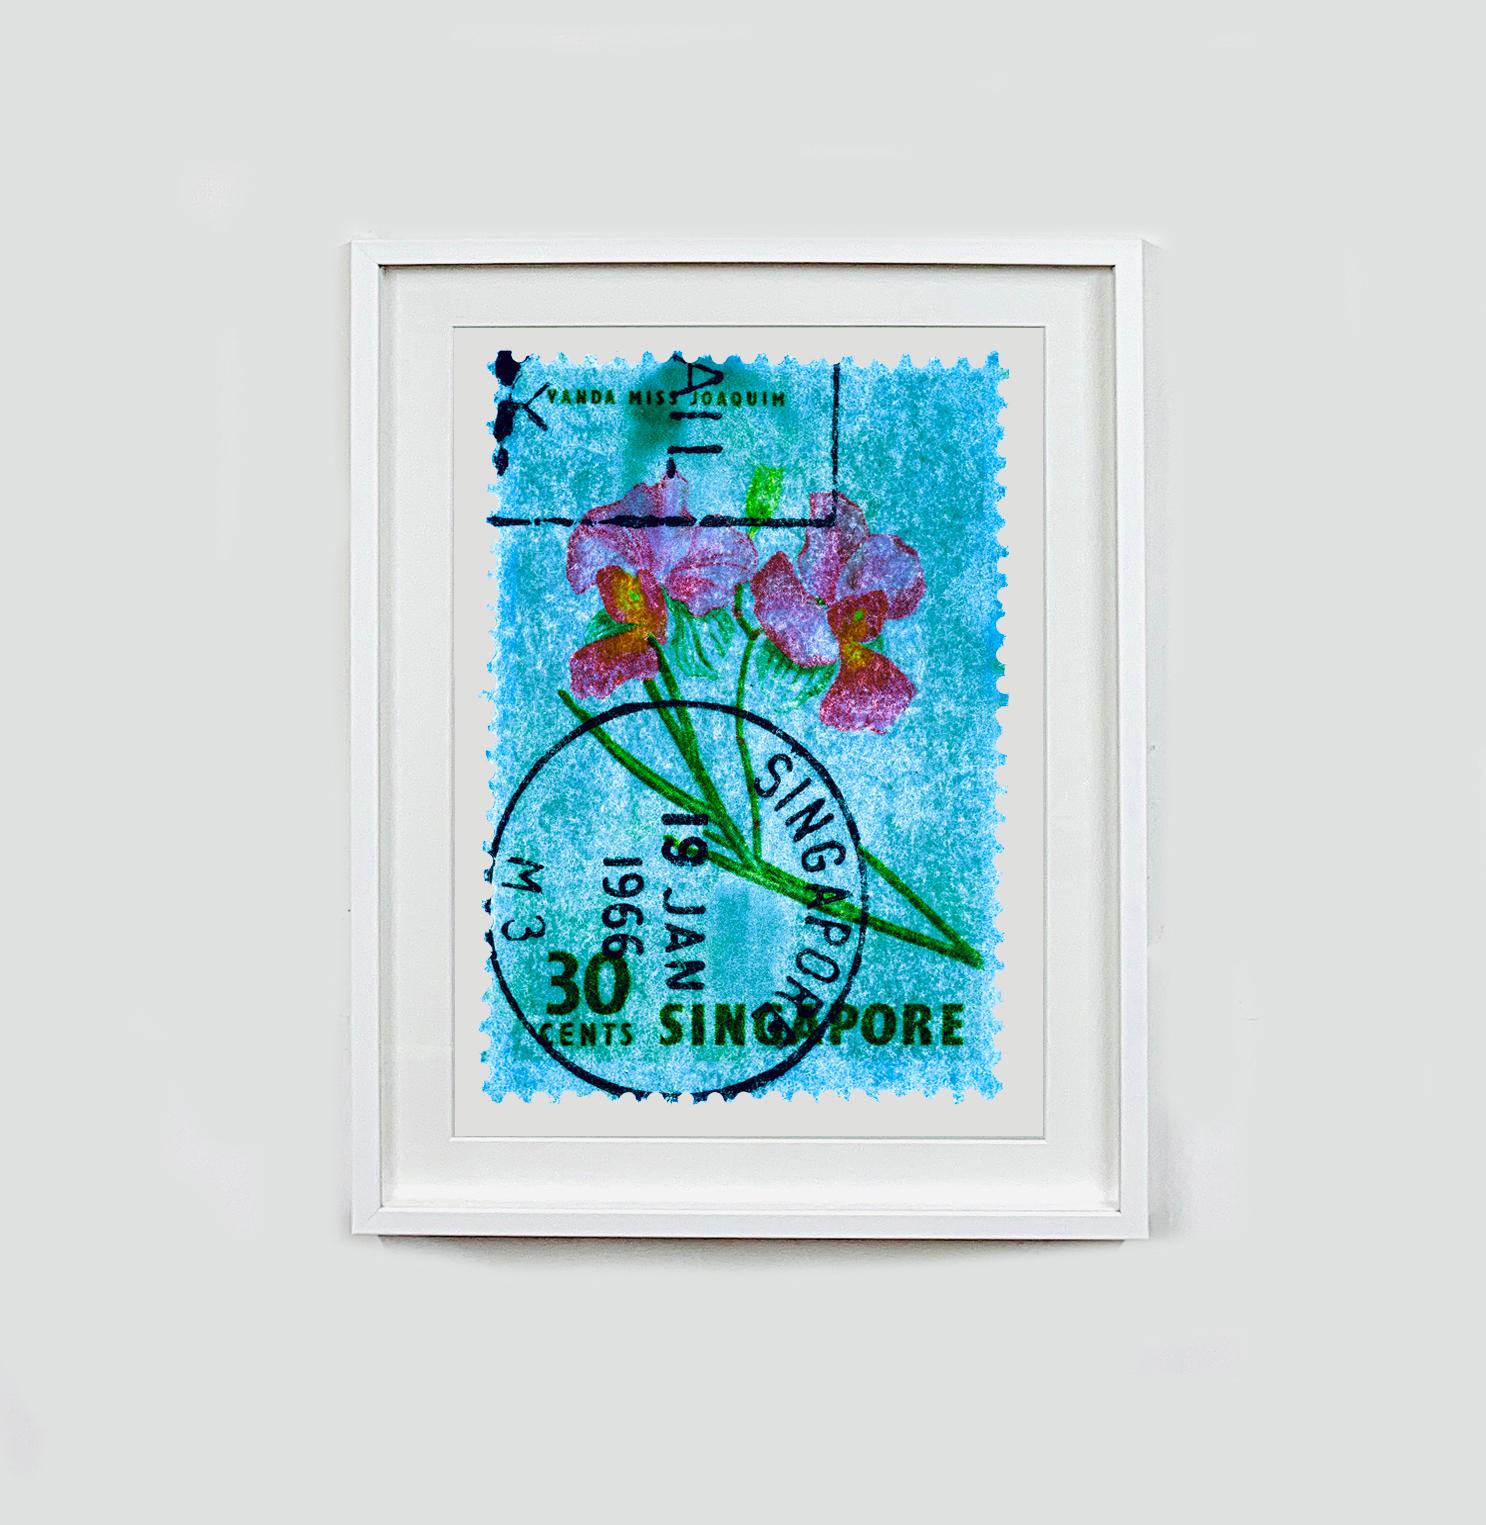 Singapore Stamp Collection, 30c Singapore Orchid Blue - Floral color photo - Conceptual Photograph by Heidler & Heeps